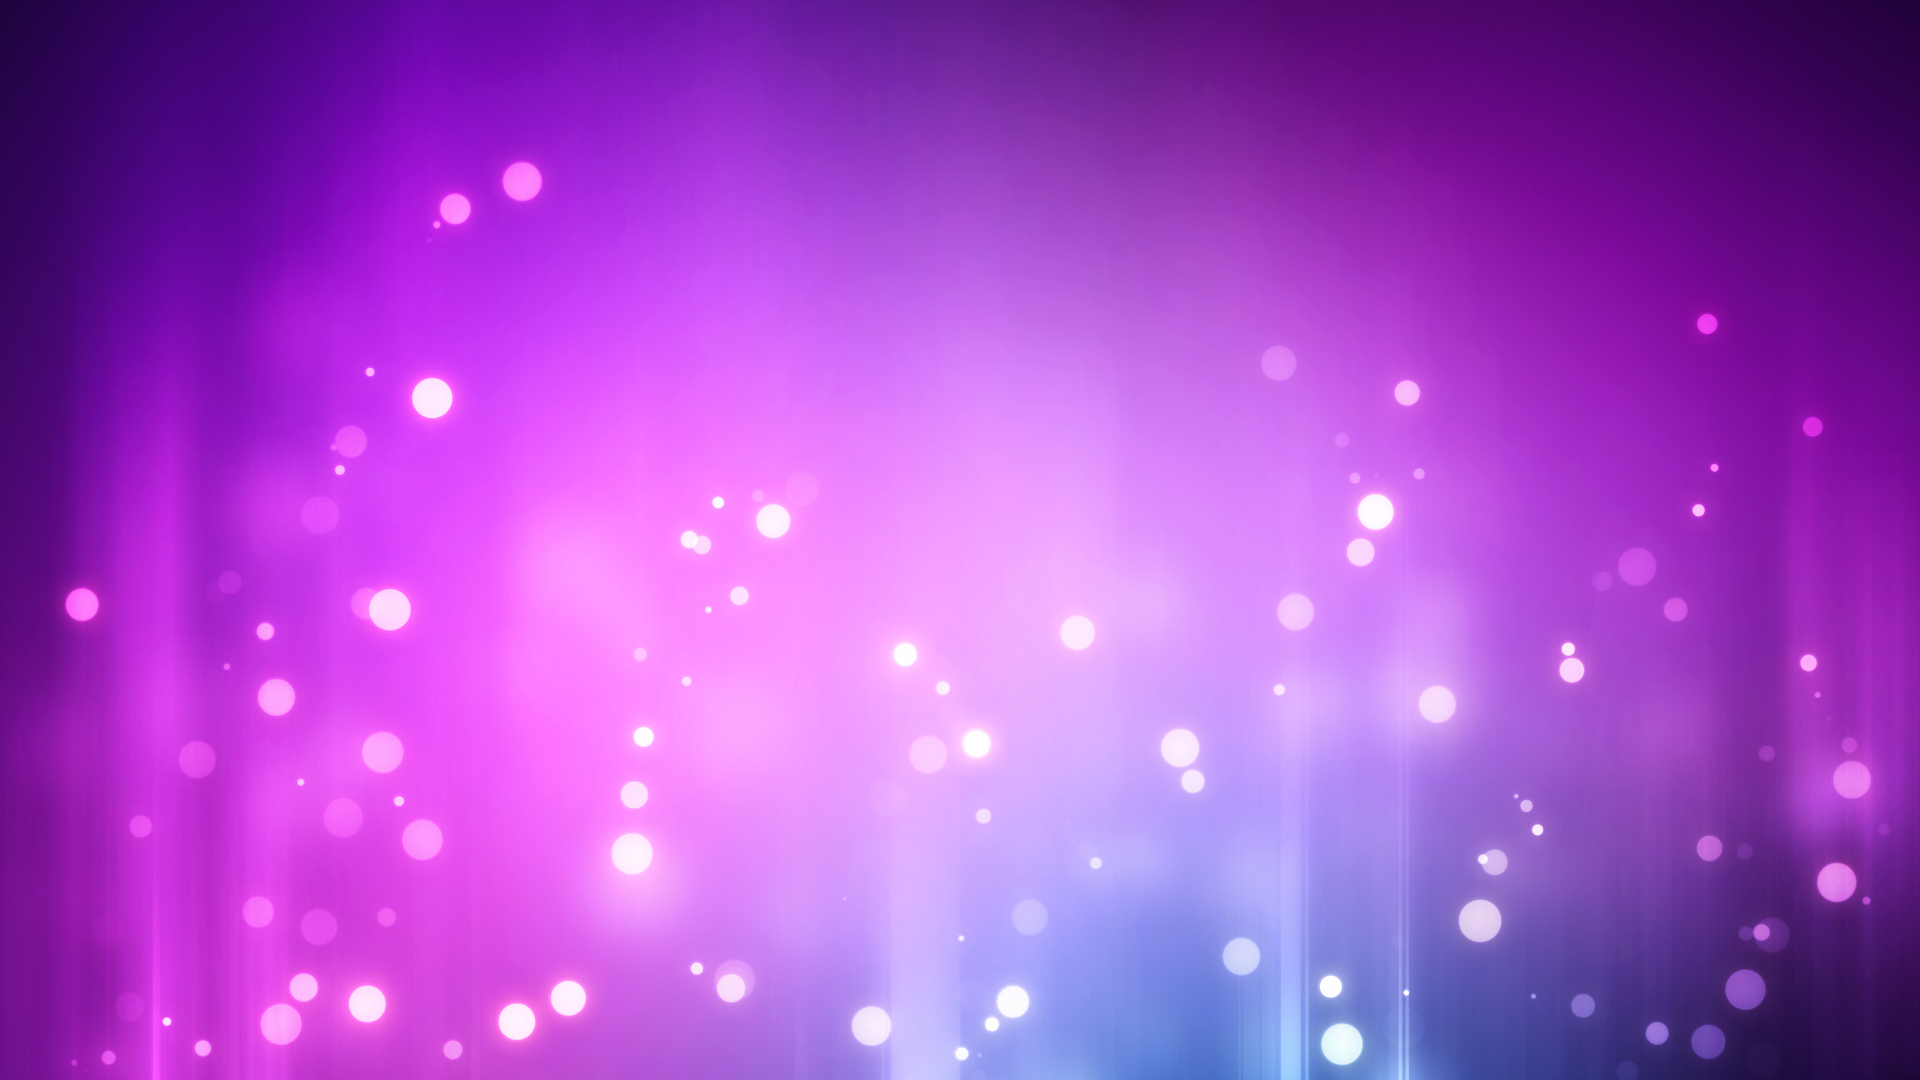 Purple Blue Sparkly Tock Lights wallpapers HD free   262595